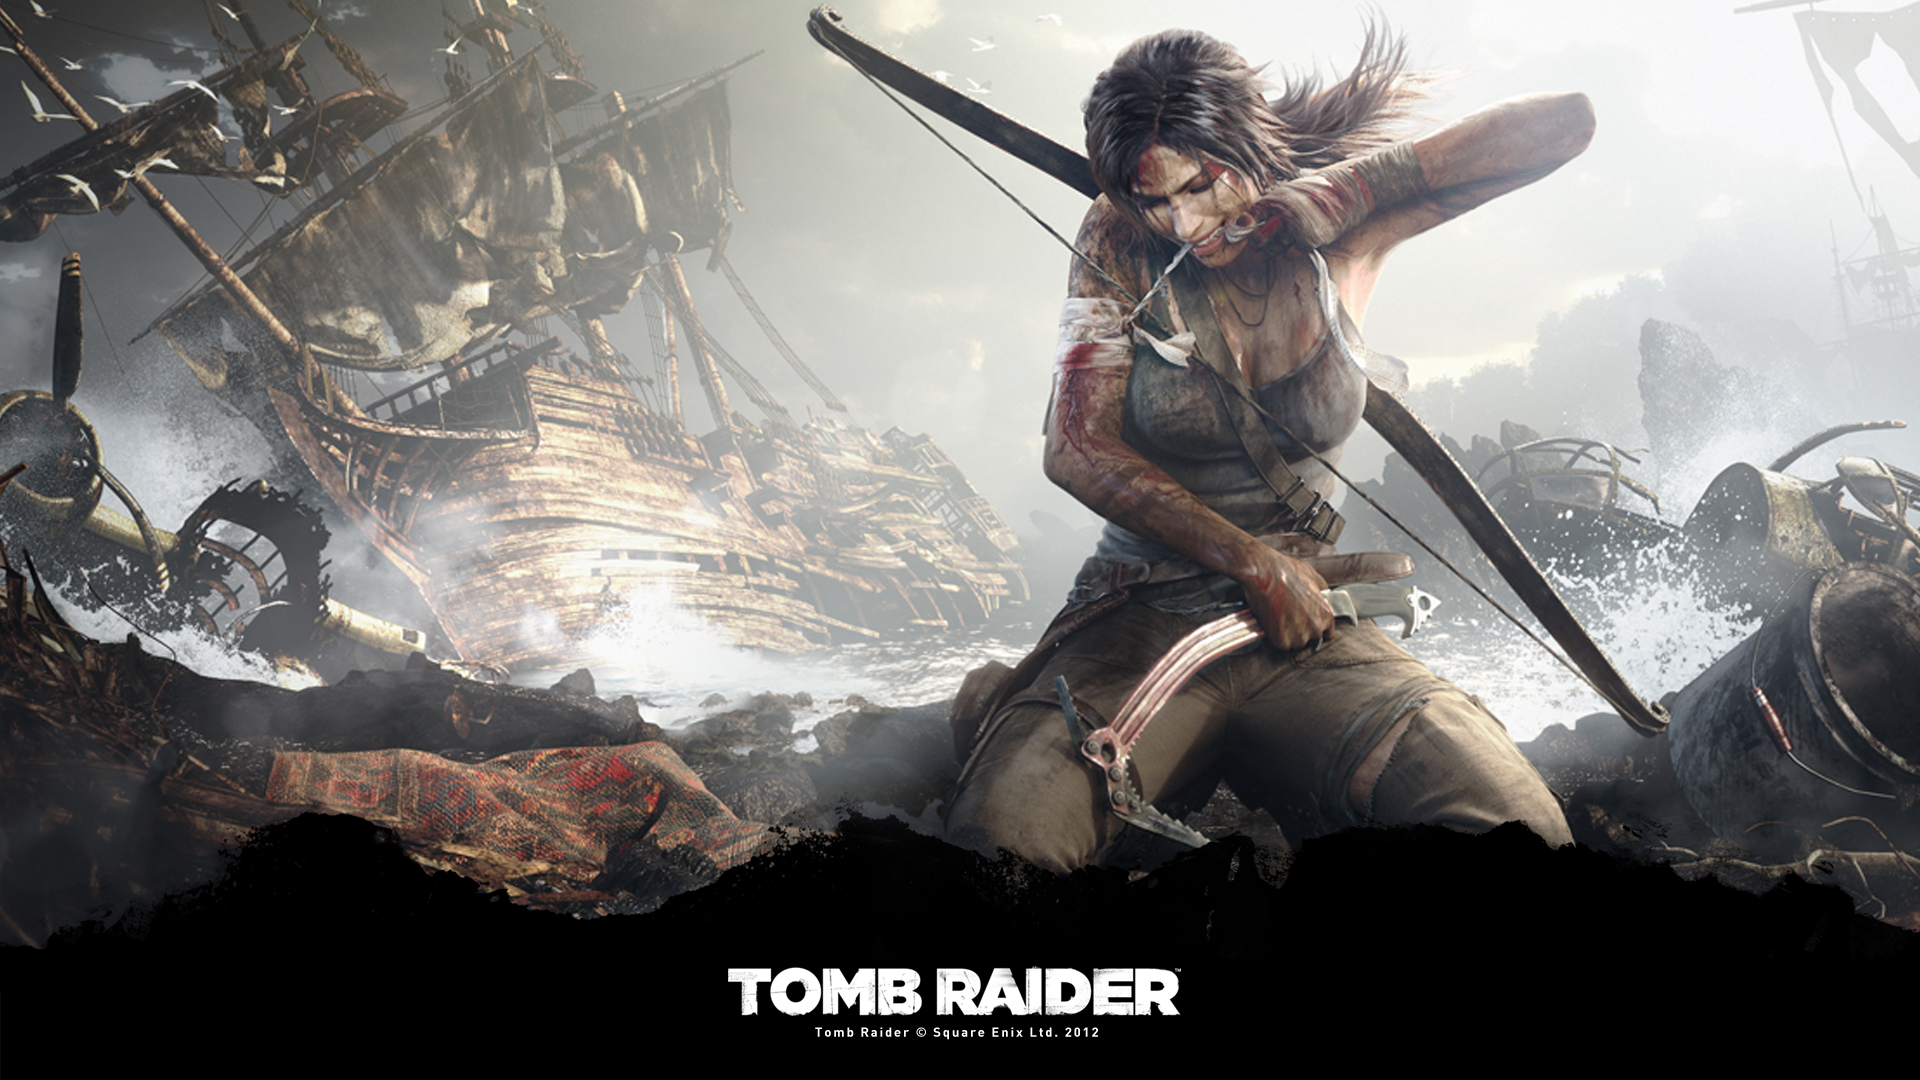 tomb raider wallpaper hd officiel 1080p   Back to the GEEK